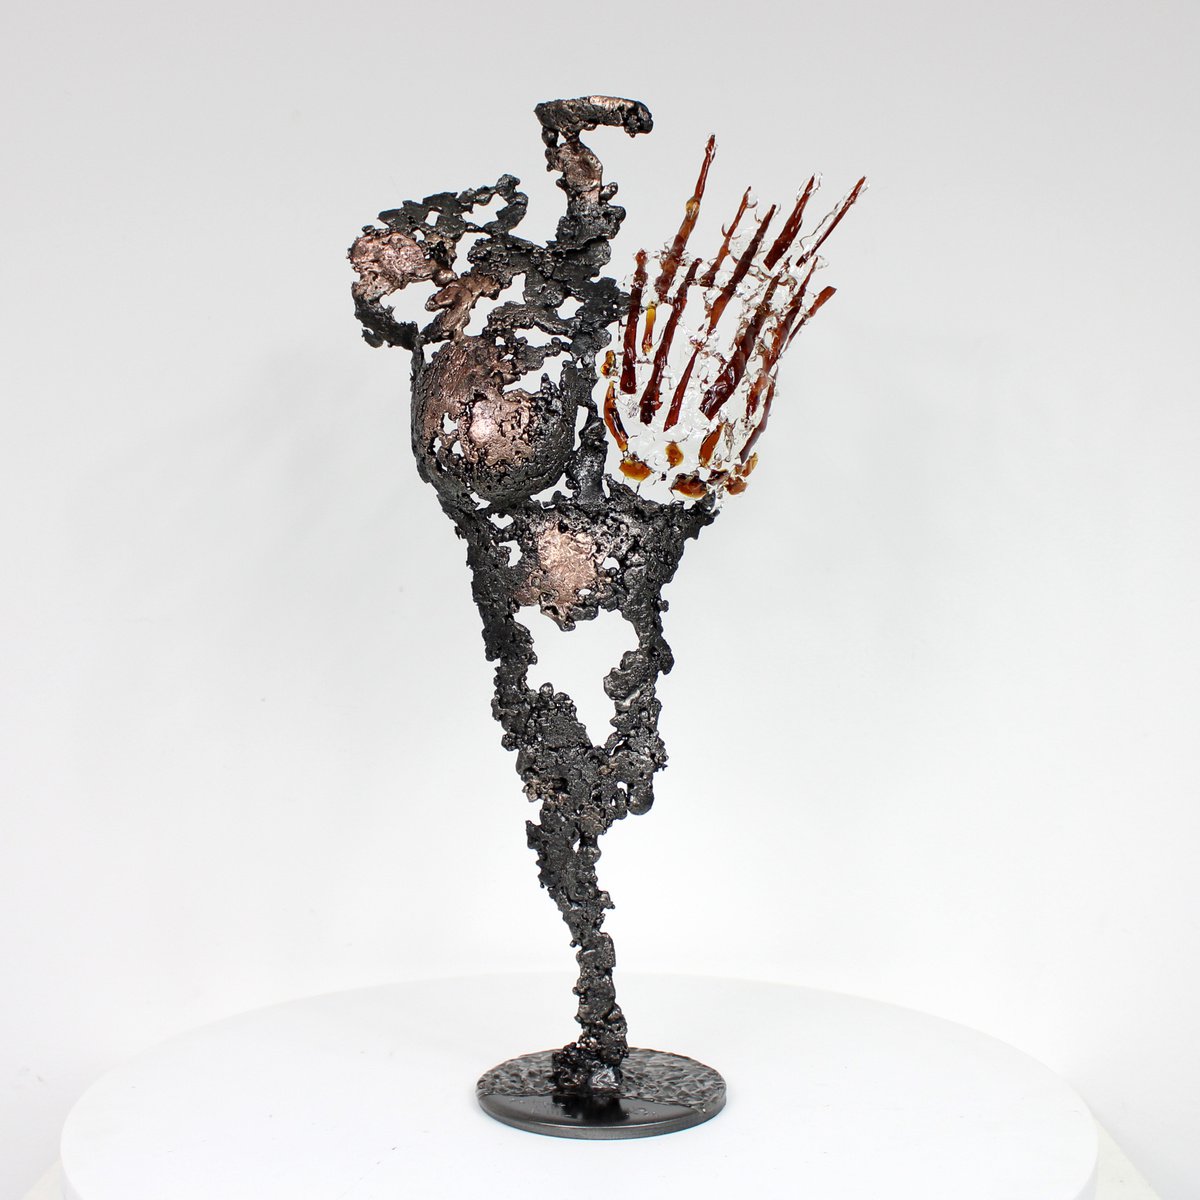 Pavarti Dew of wood - Woman body sculpture in metal and glass lace with wood by Philippe Buil